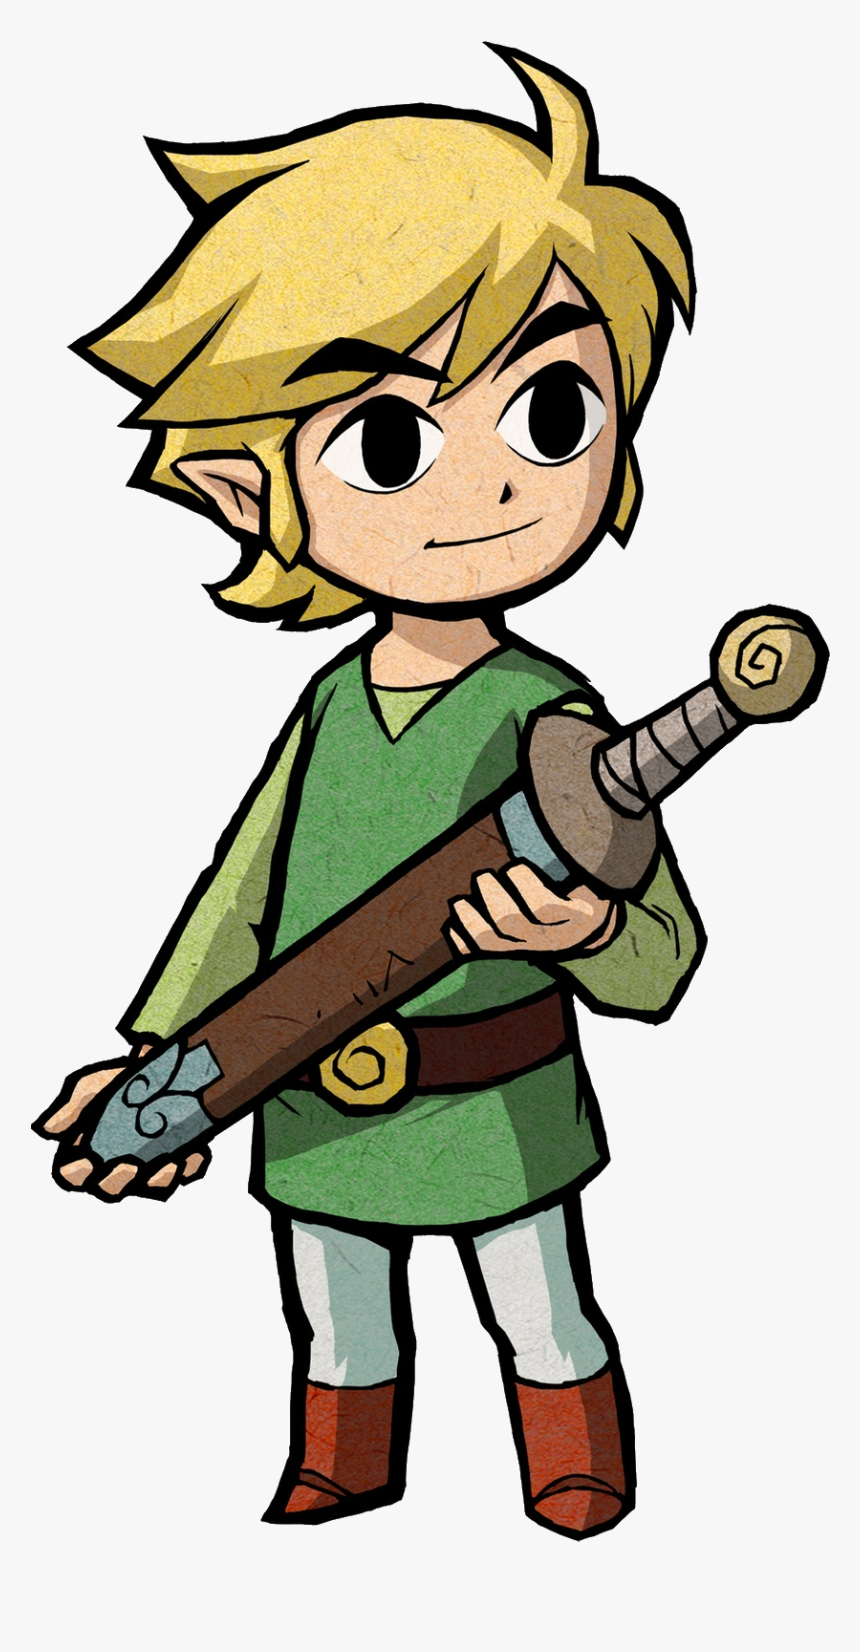 Link The Minish Cap, HD Png Download, Free Download